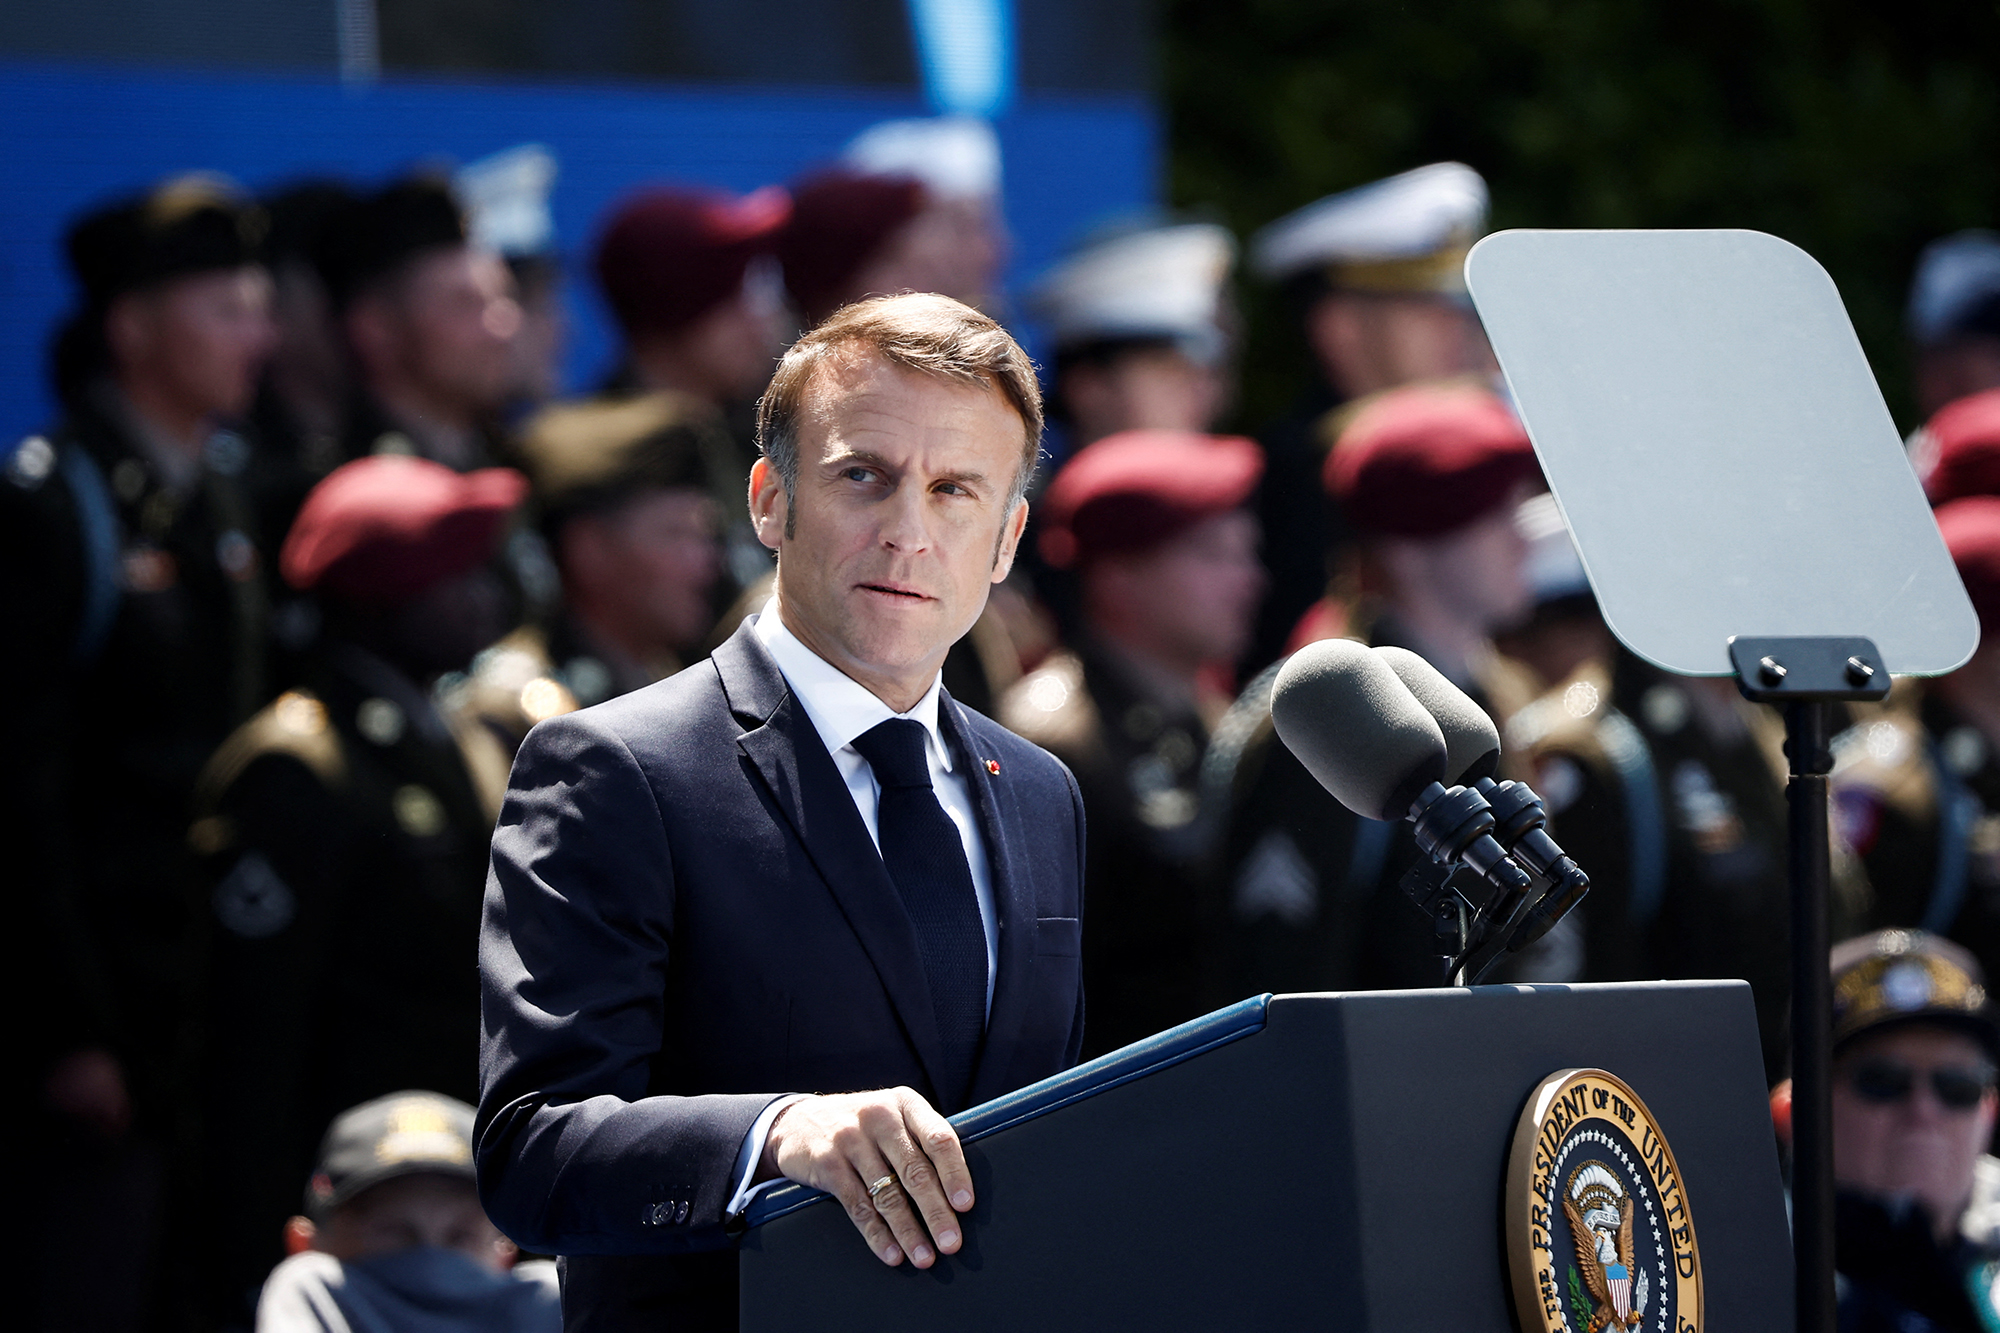 French President Emmanuel Macron delivers a speeach during a ceremony to mark the 80th anniversary of D-Day at the Normandy American Cemetery and Memorial in Colleville-sur-Mer, France, on June 6.